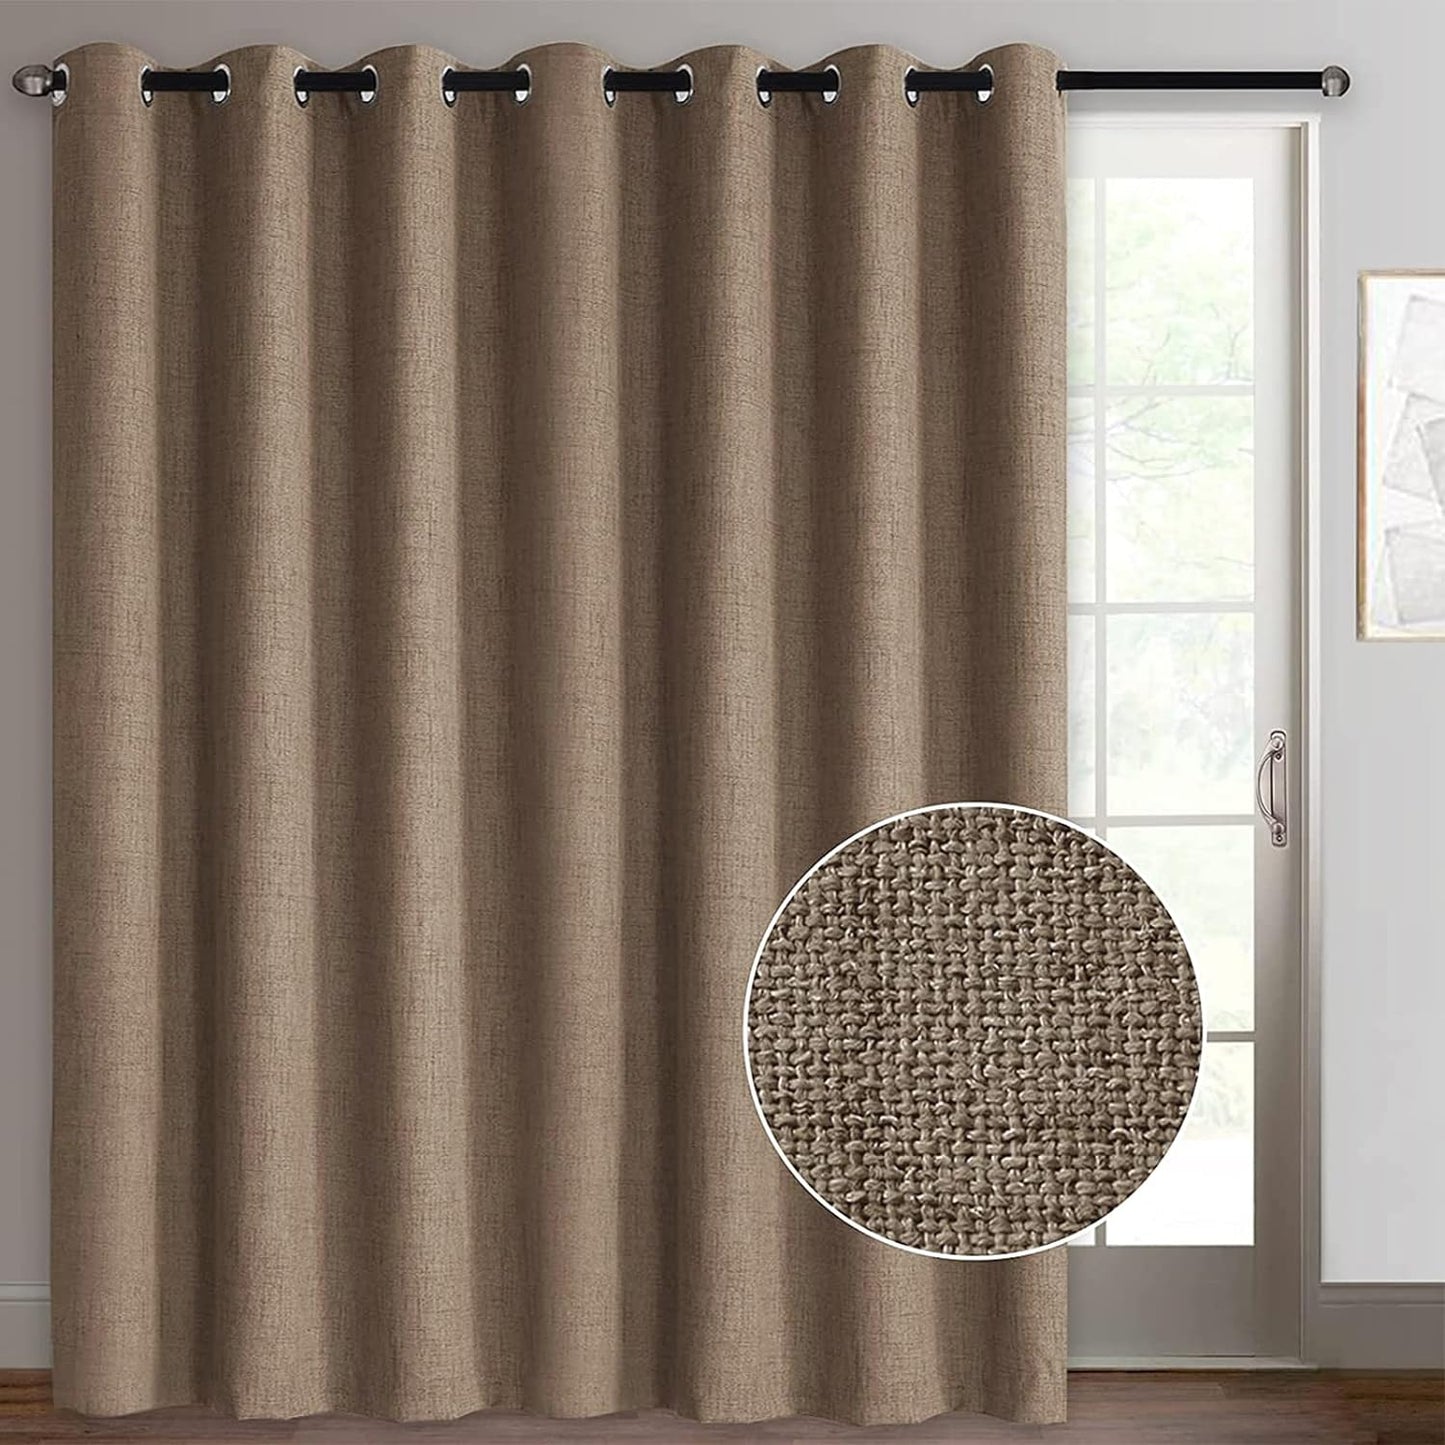 Rose Home Fashion Sliding Door Curtains, Primitive Linen Look 100% Blackout Curtains, Thermal Insulated Patio Door Curtains-1 Panel (W100 X L84, Grey)  Rose Home Fashion Chocolate W100 X L84|1 Panel 